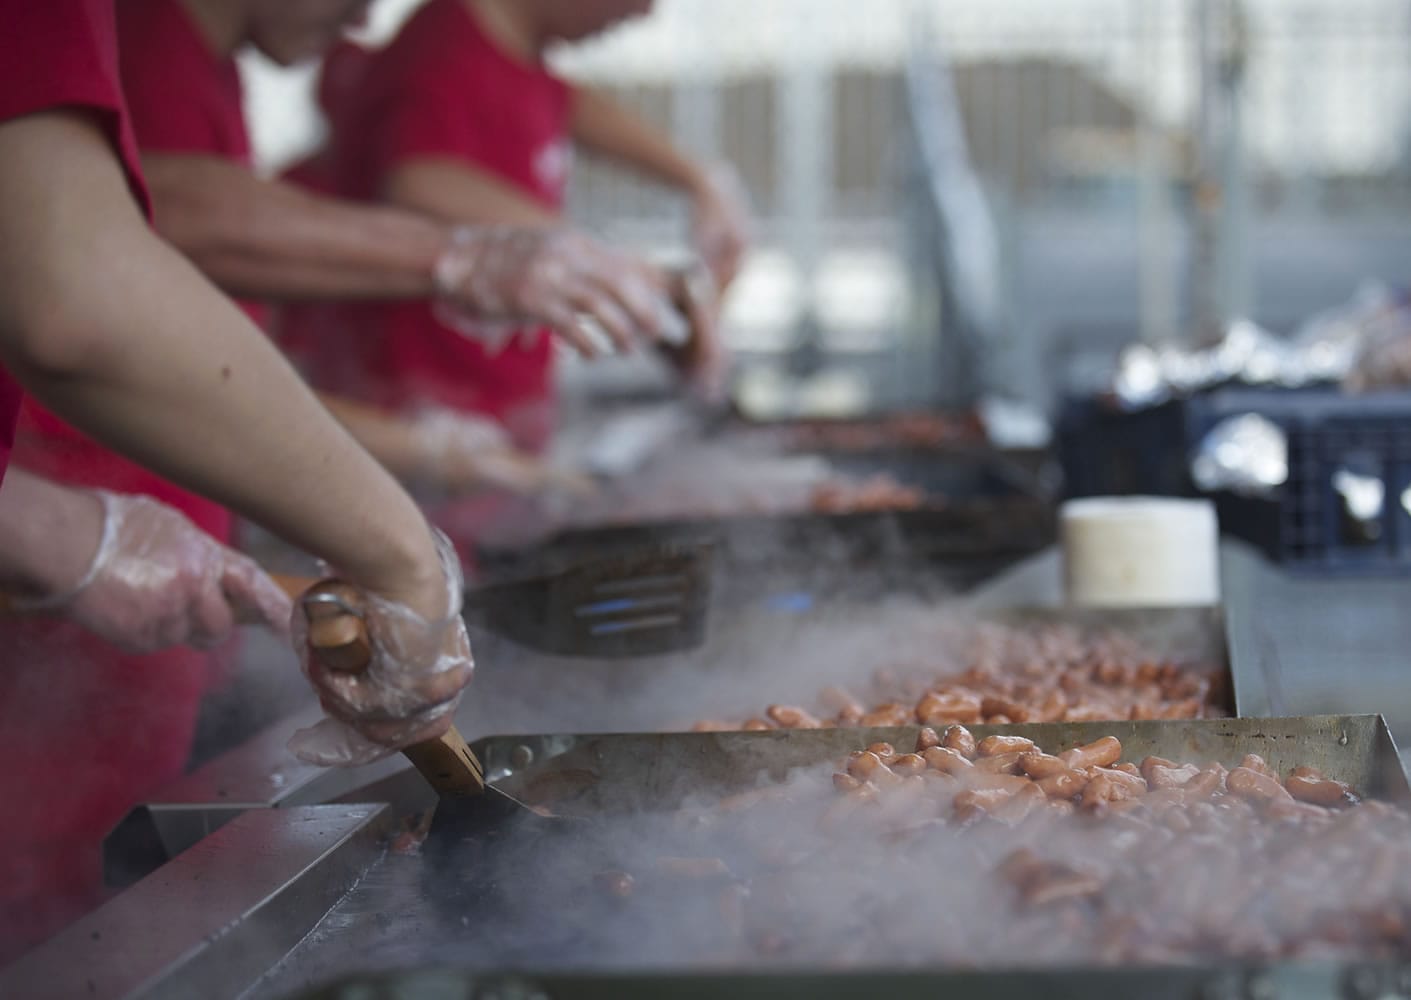 Volunteers fry up sausages for the thousands of people who took advantage of the free breakfast sponsored by Fred Meyer on the opening day of the Clark County Fair.